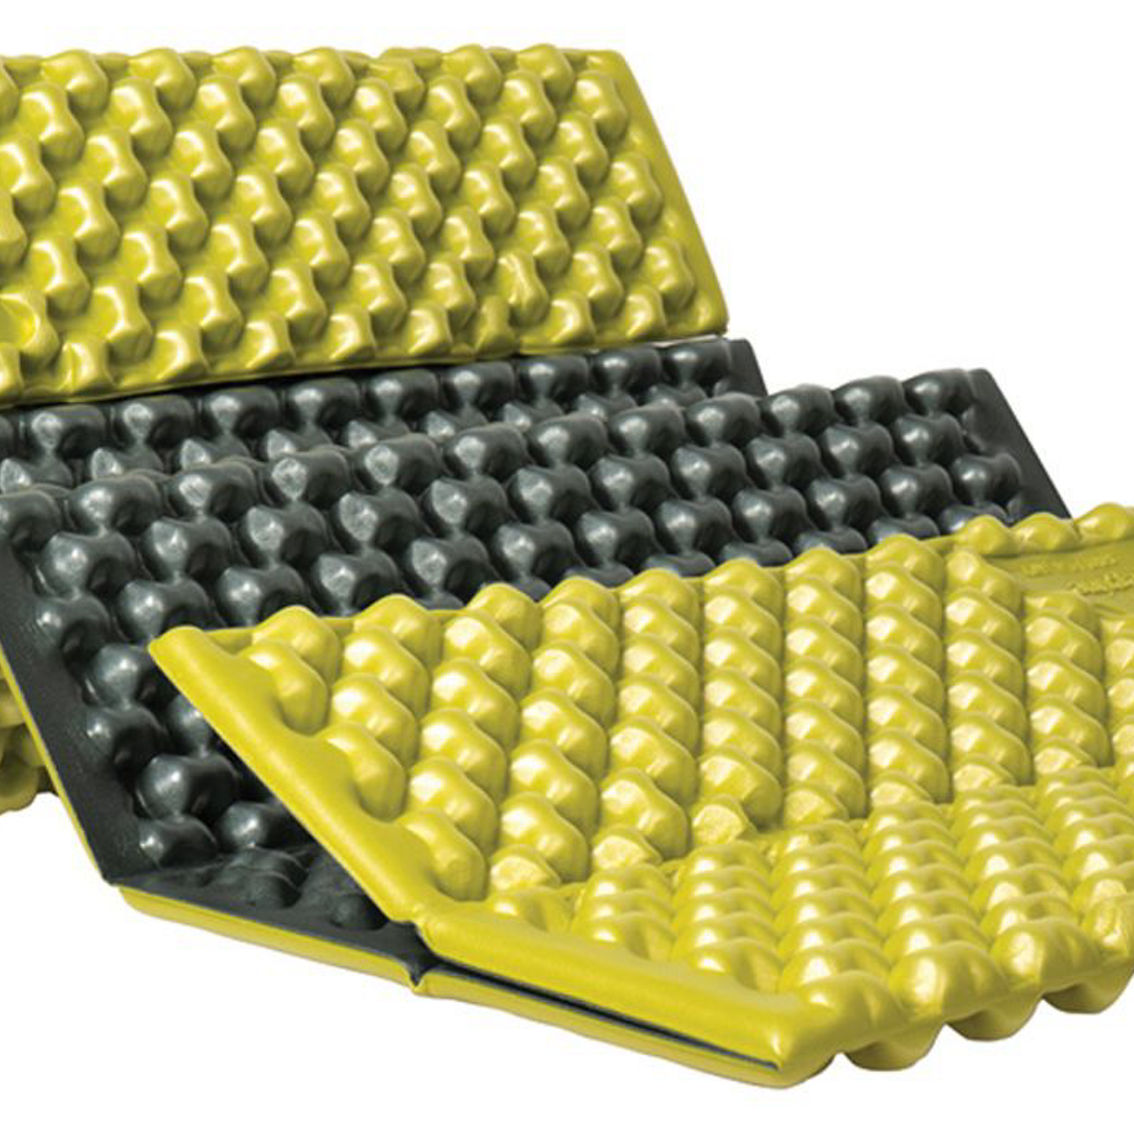 GRID-LINK FOLDING IXPE CLOSED CELL FOAM PAD - Image 5 of 5